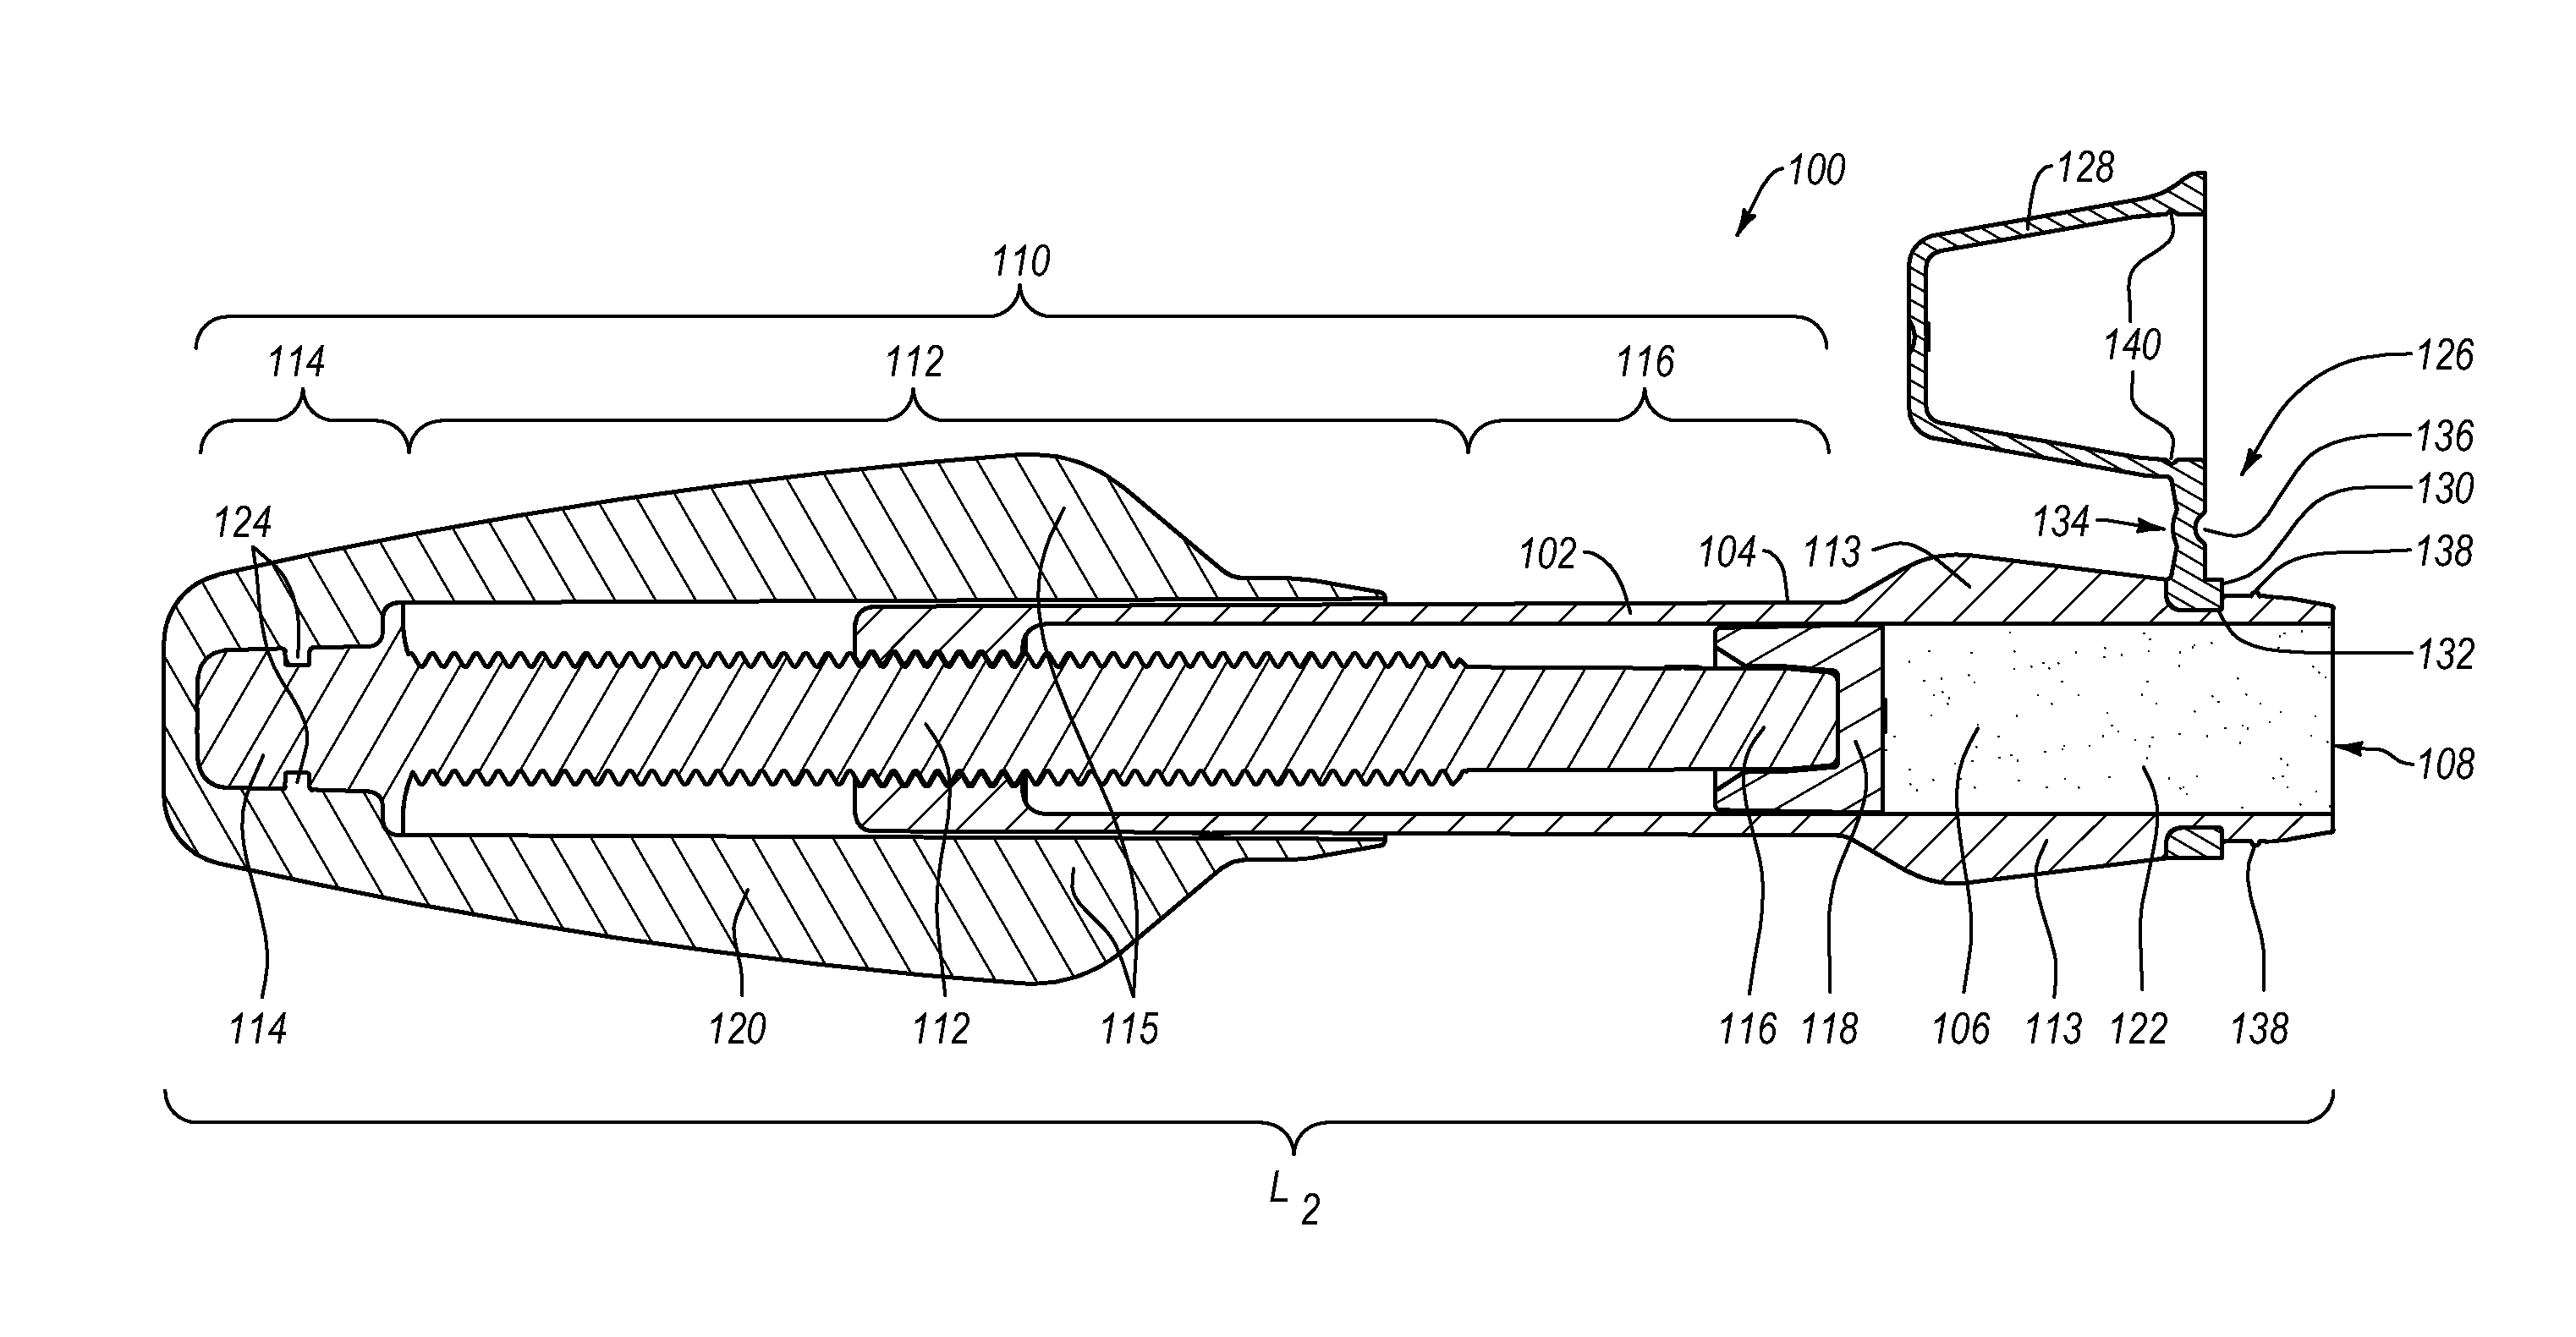 Composite delivery system